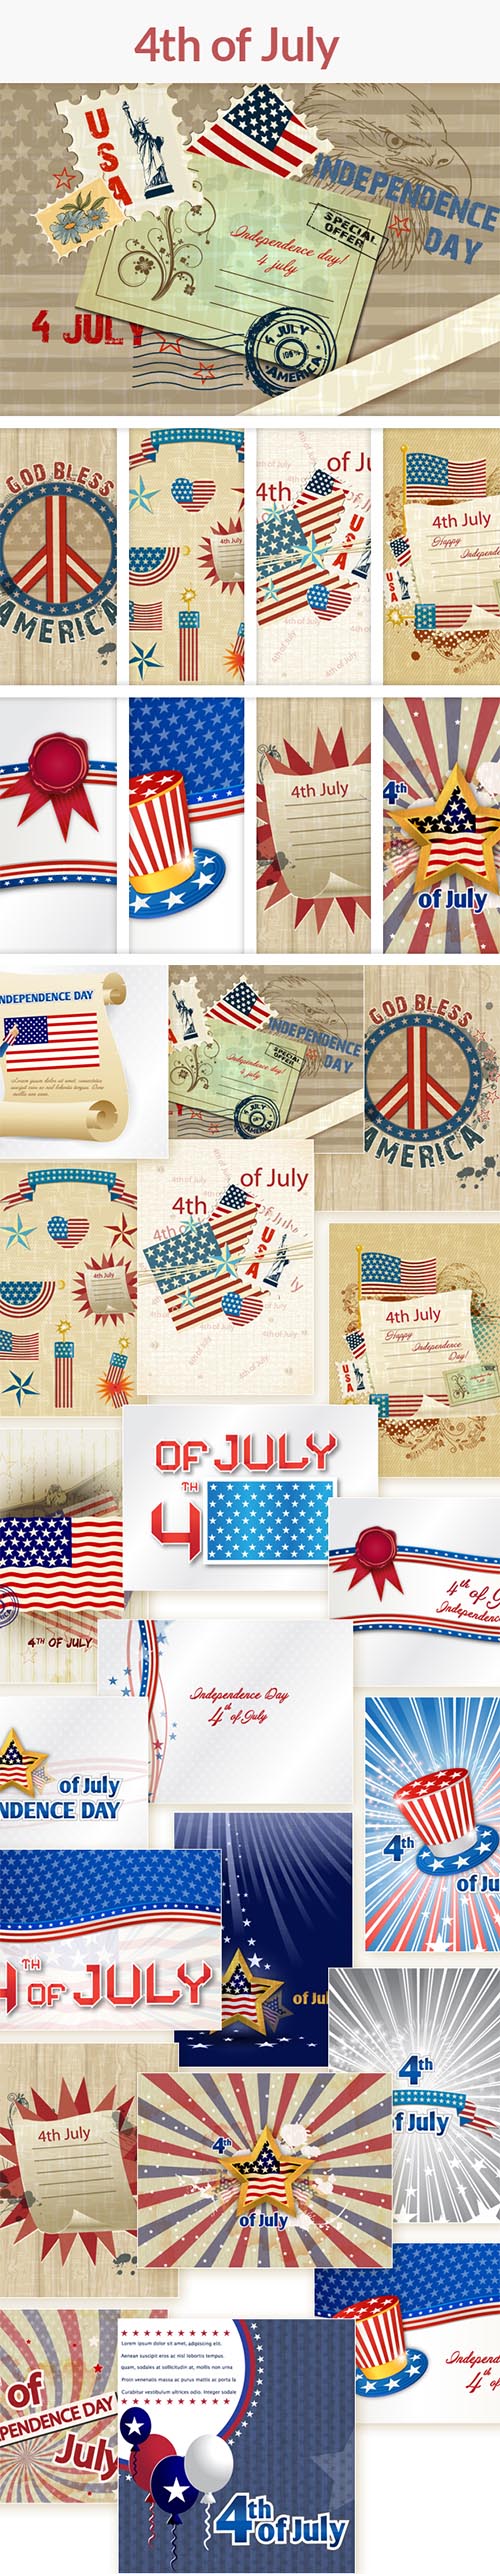 20 4th of July Vector Illustrations